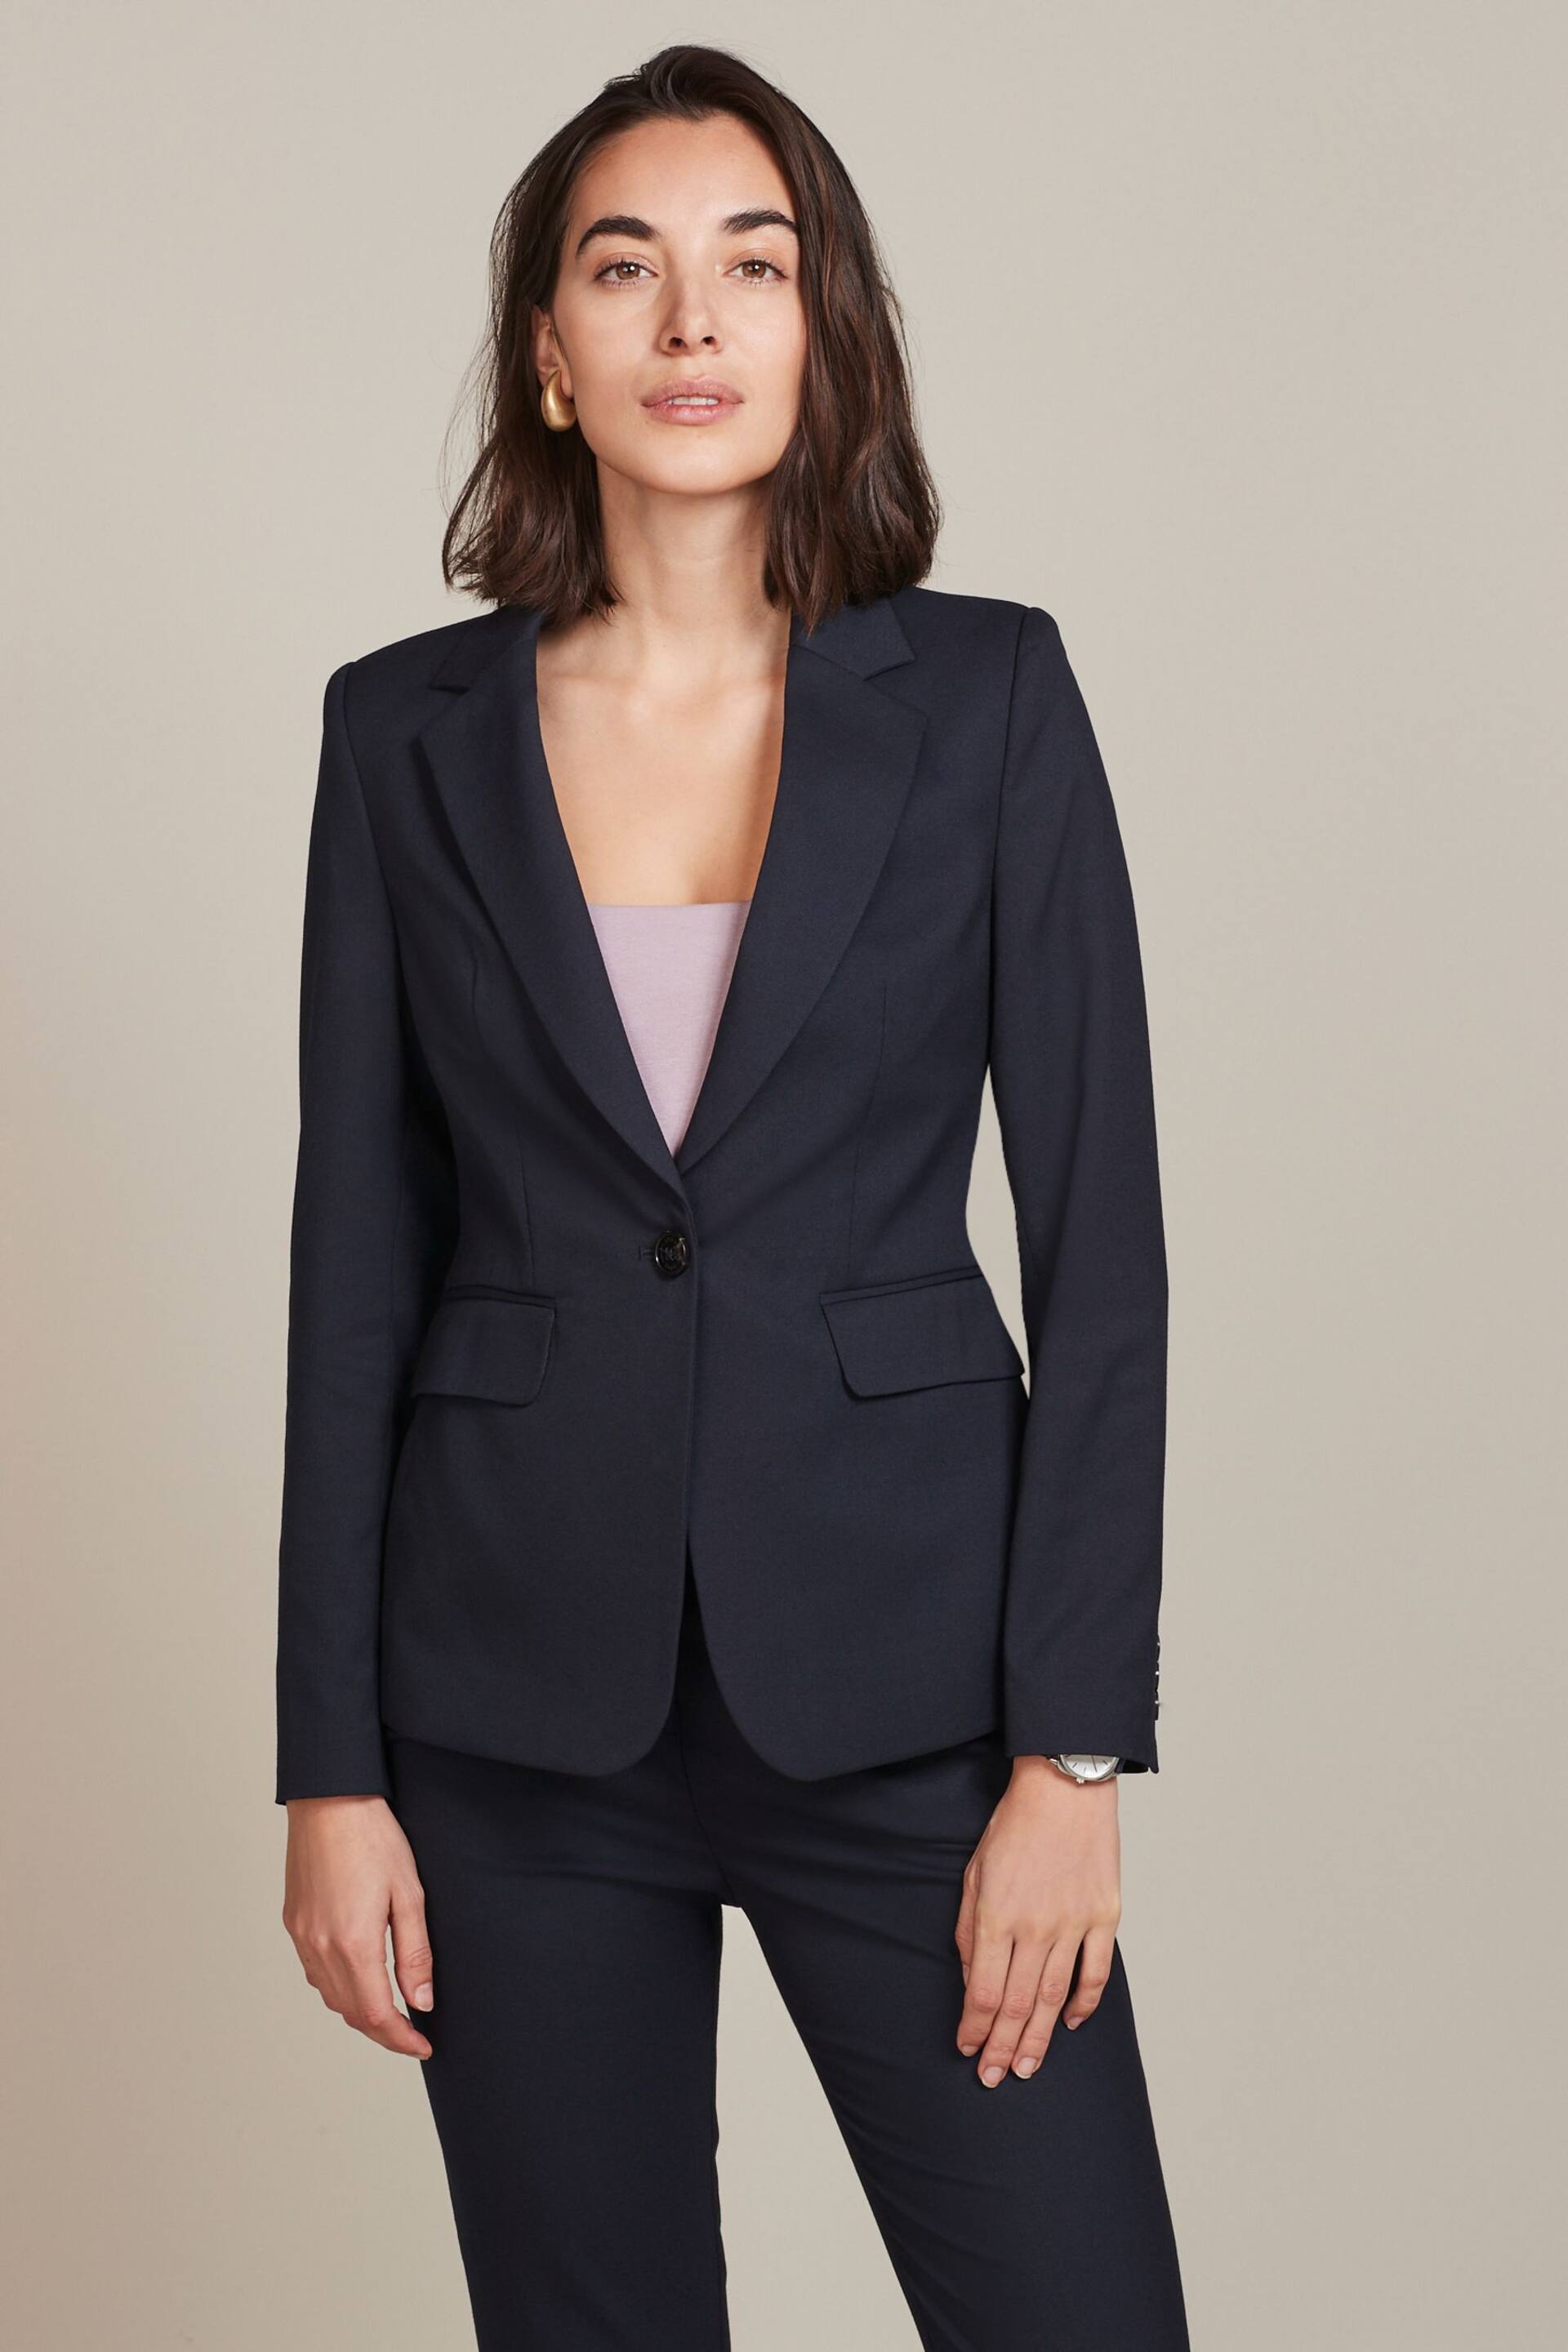 Navy Blue Tailored Single Breasted Jacket - Image 1 of 6